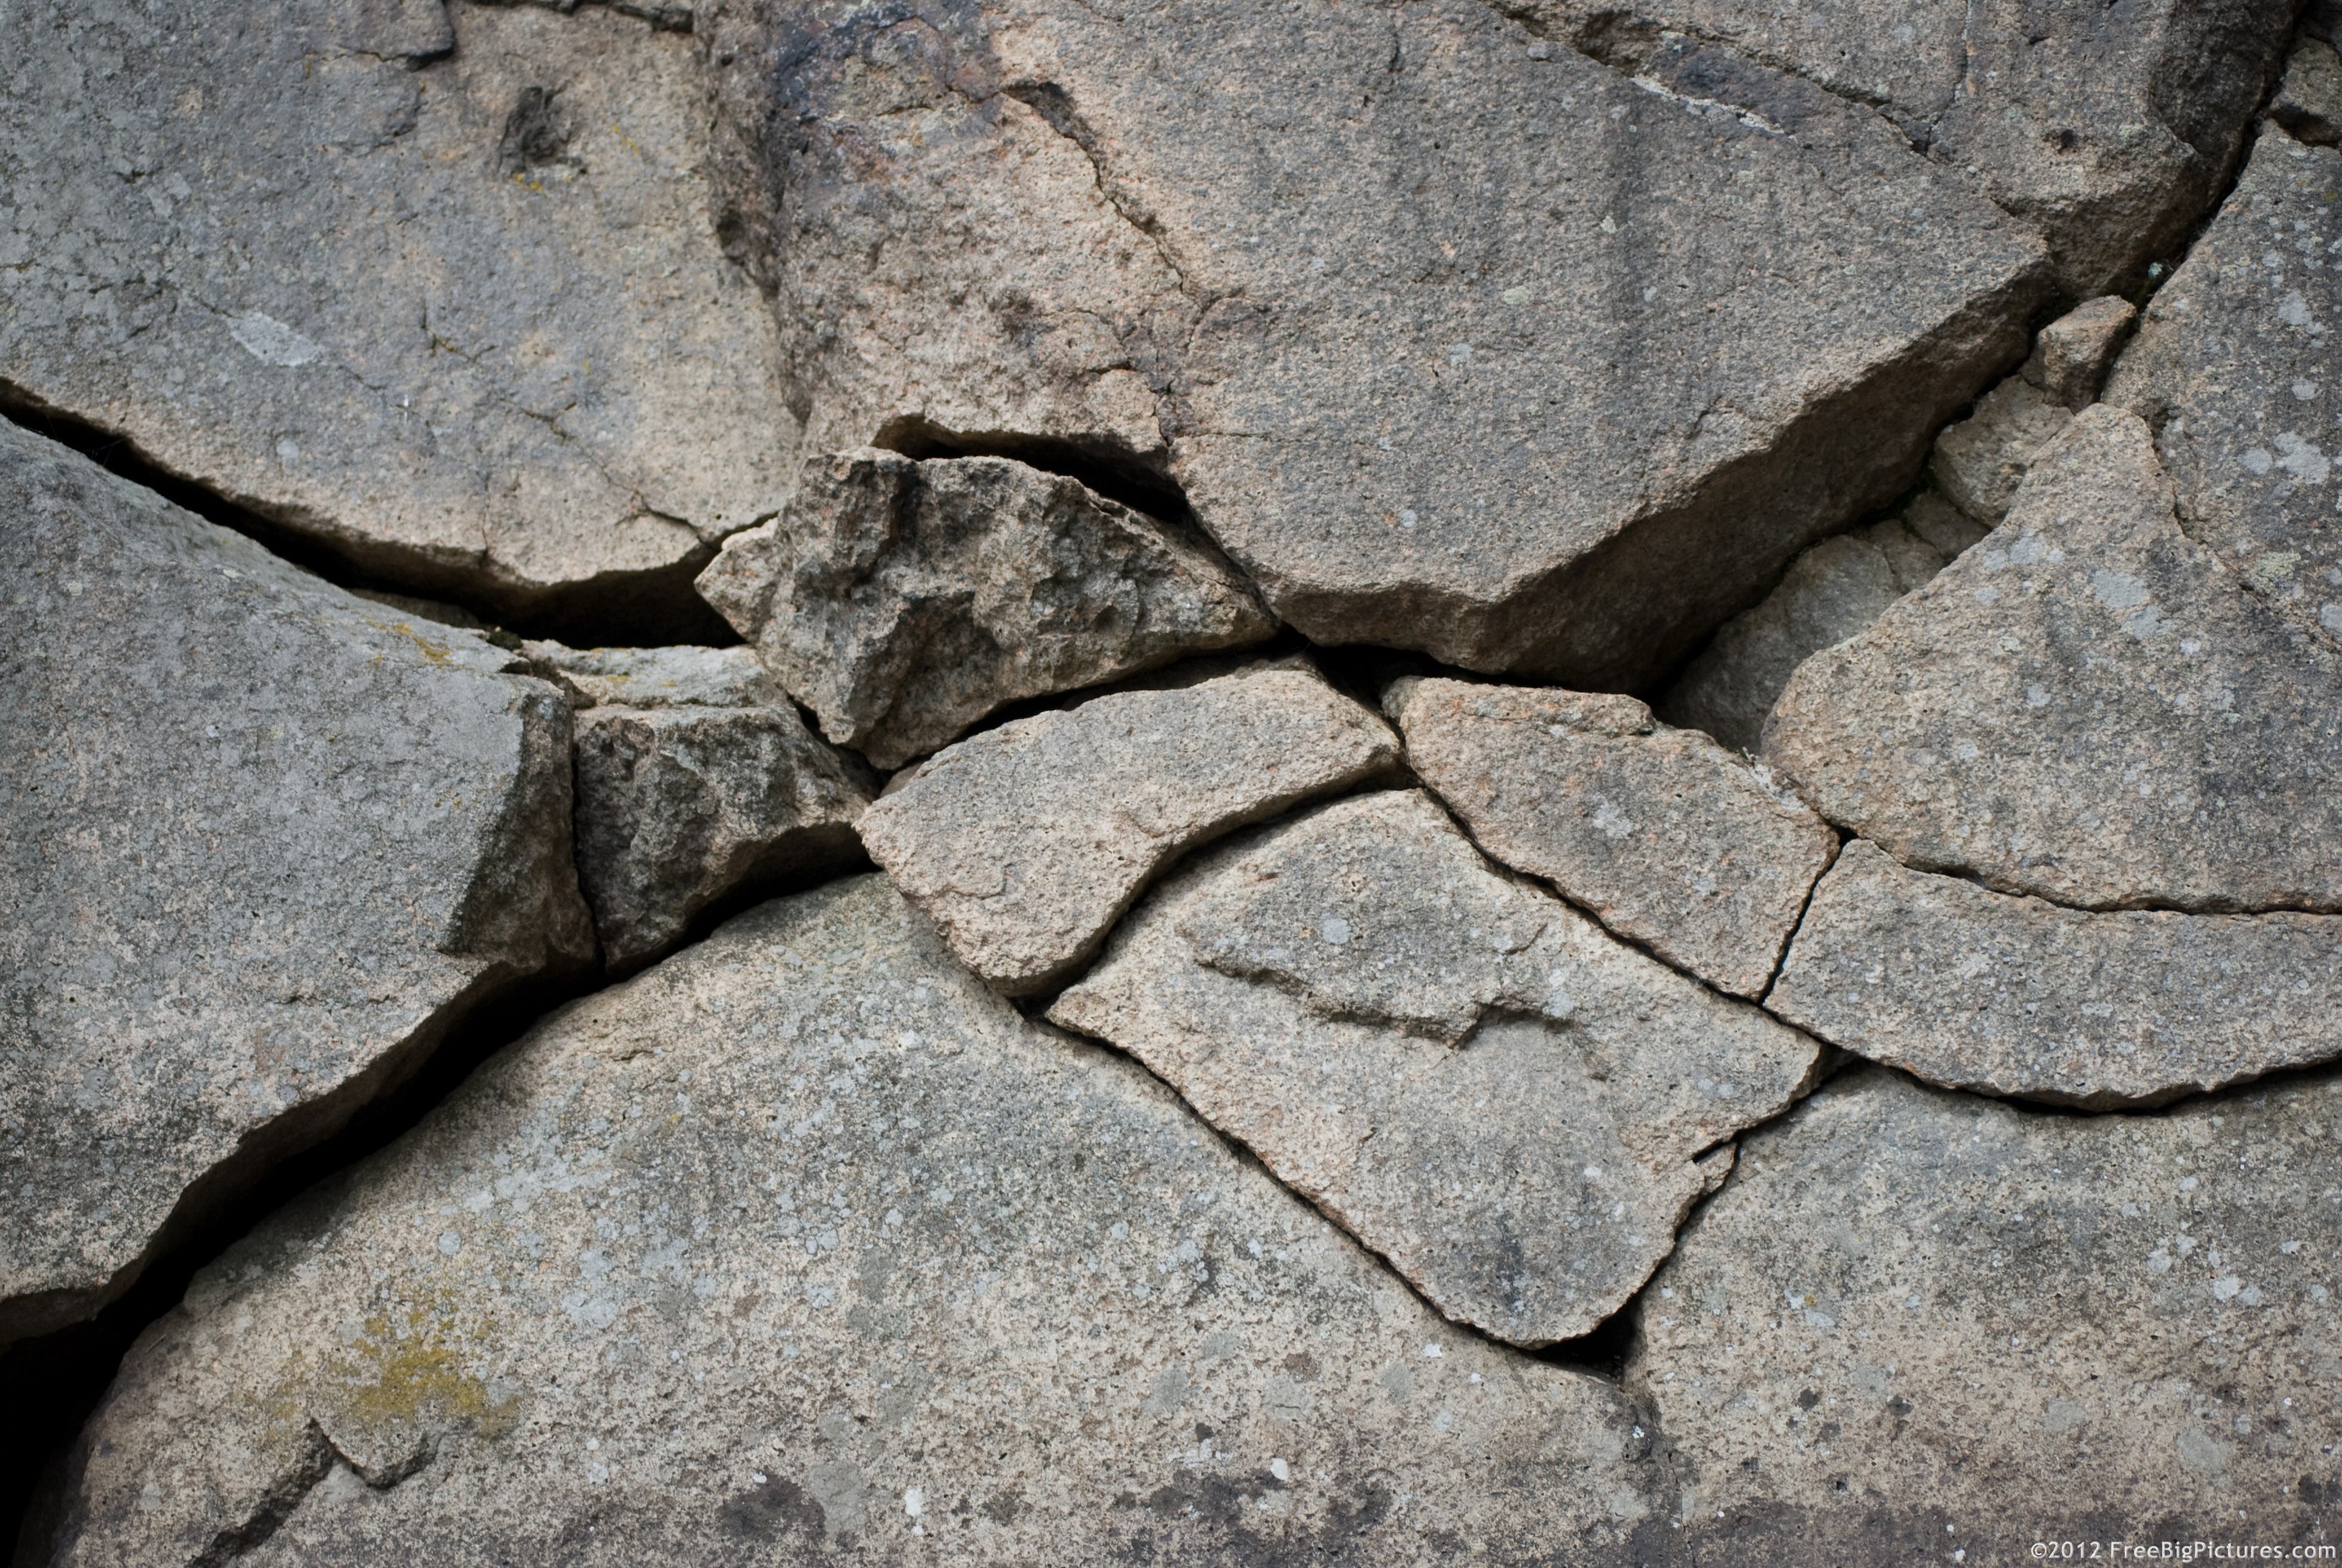 A basalt cracked stone wall with deep, black crevices